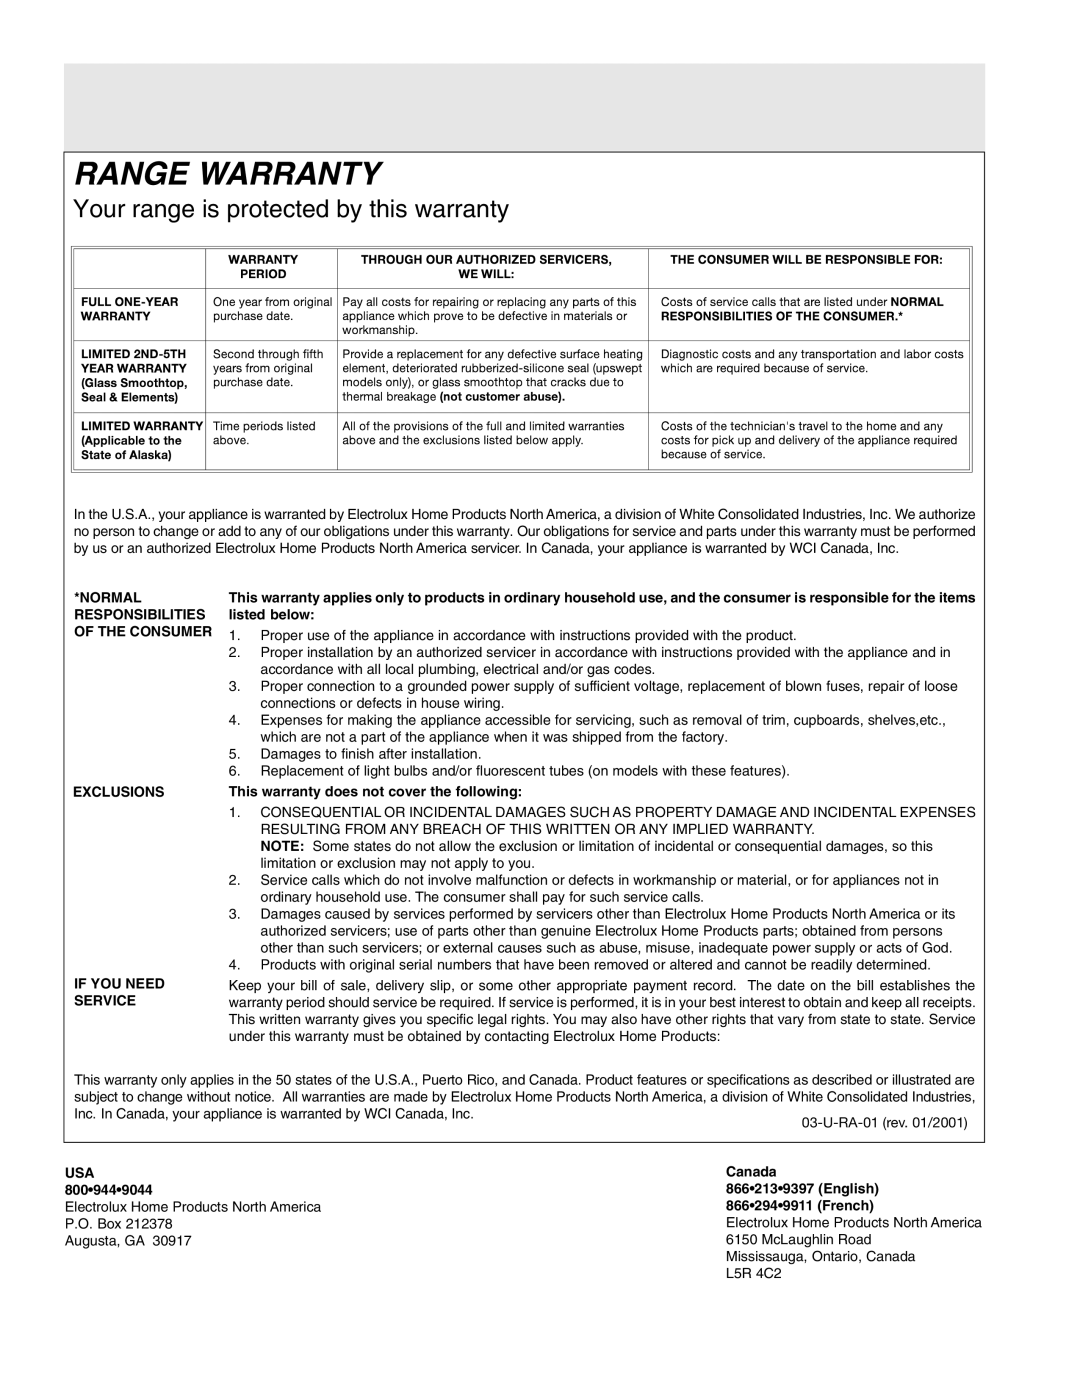 Frigidaire pmn Range Warranty, Your range is protected by this warranty, Normal Responsibilities Of The Consumer, Usa 